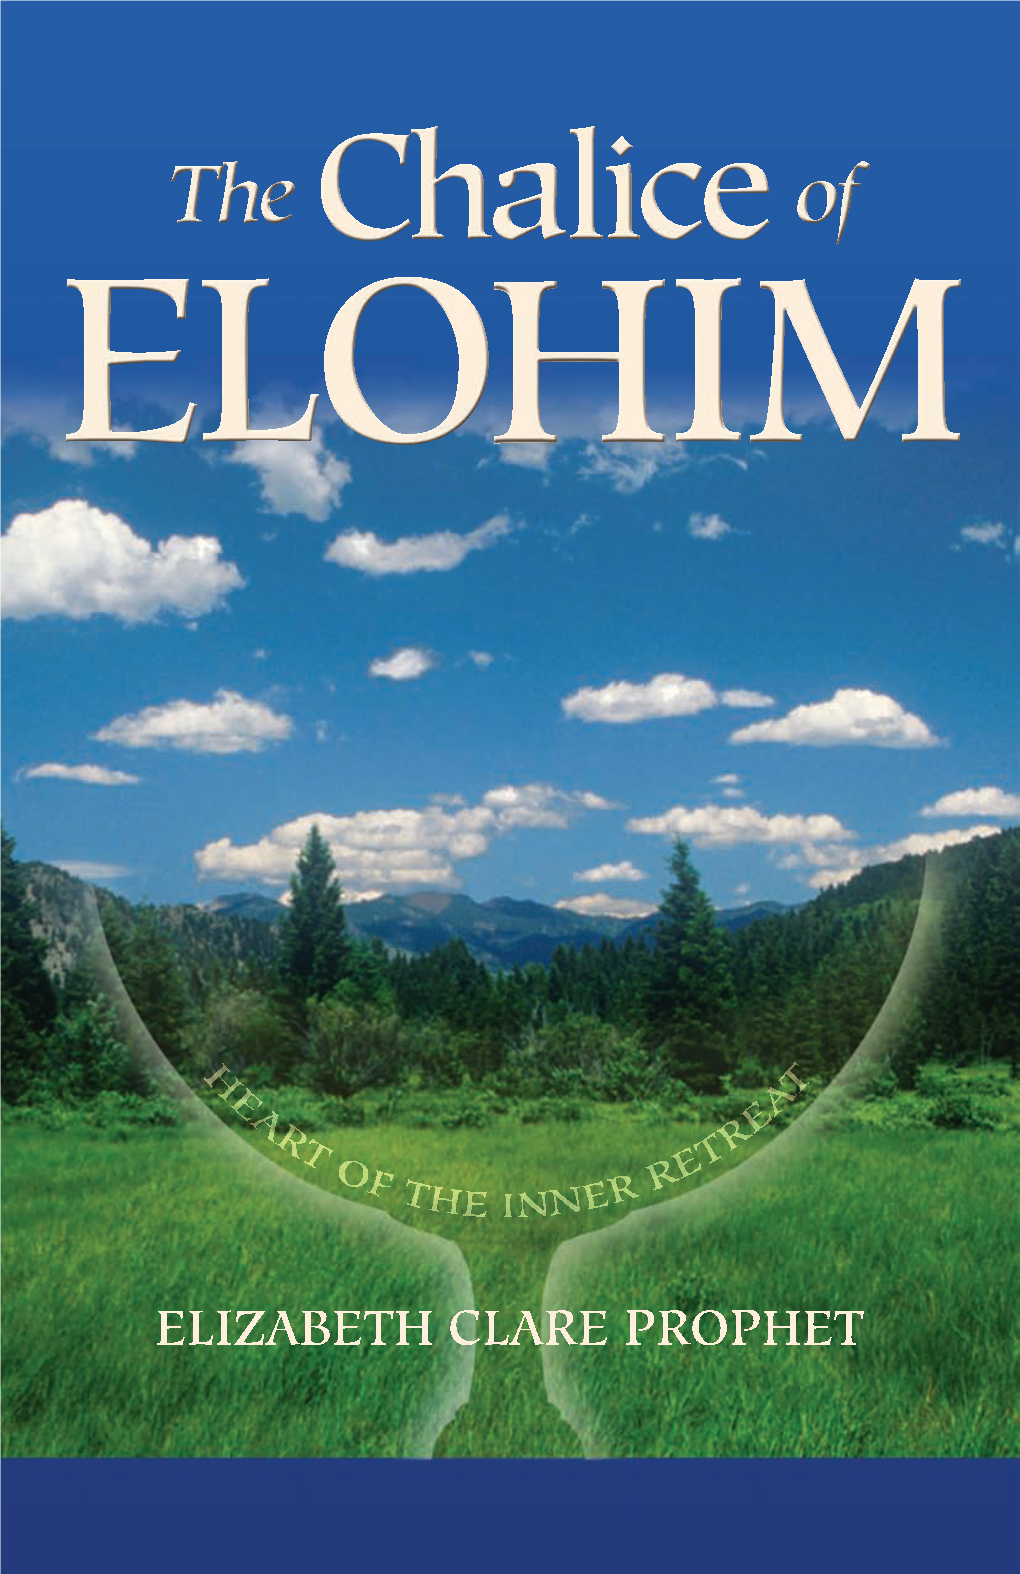 The Chalice of ELOHIM